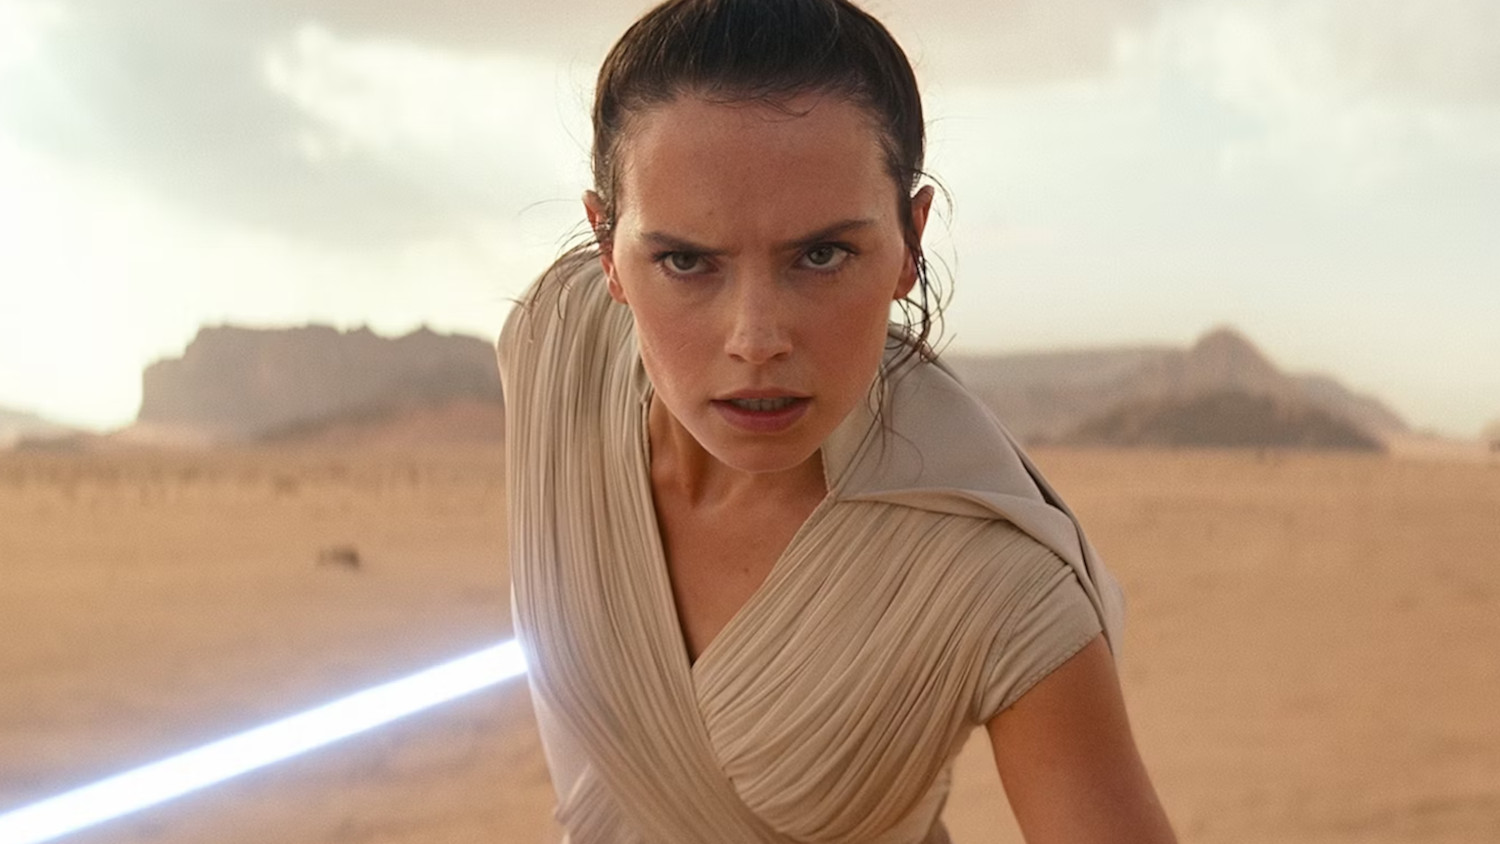 Daisy Ridley Rumored Star Wars Title Is ‘A New Beginning’ According To AI